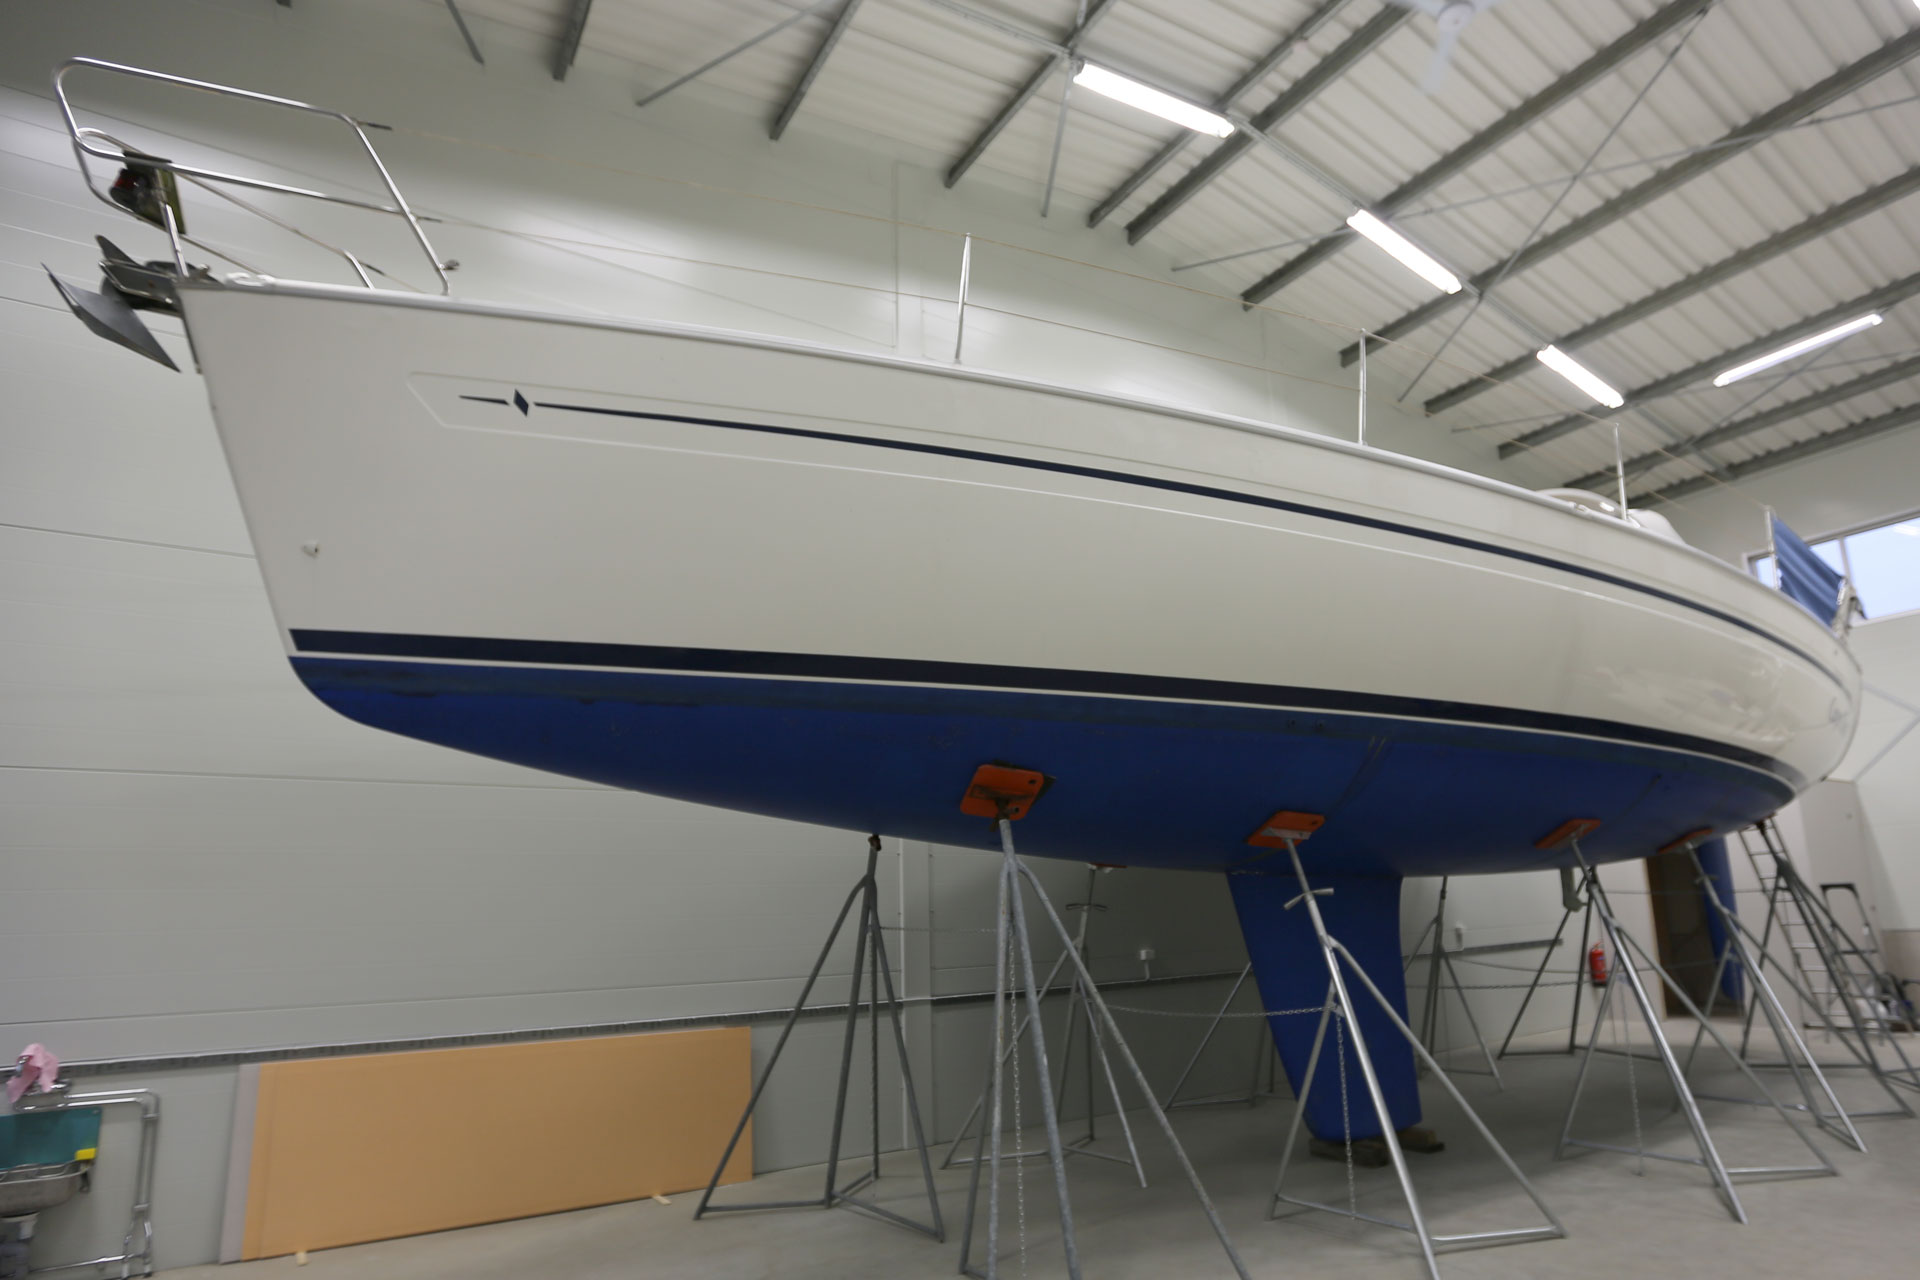 New photos and video of Bavaria 38 for sale